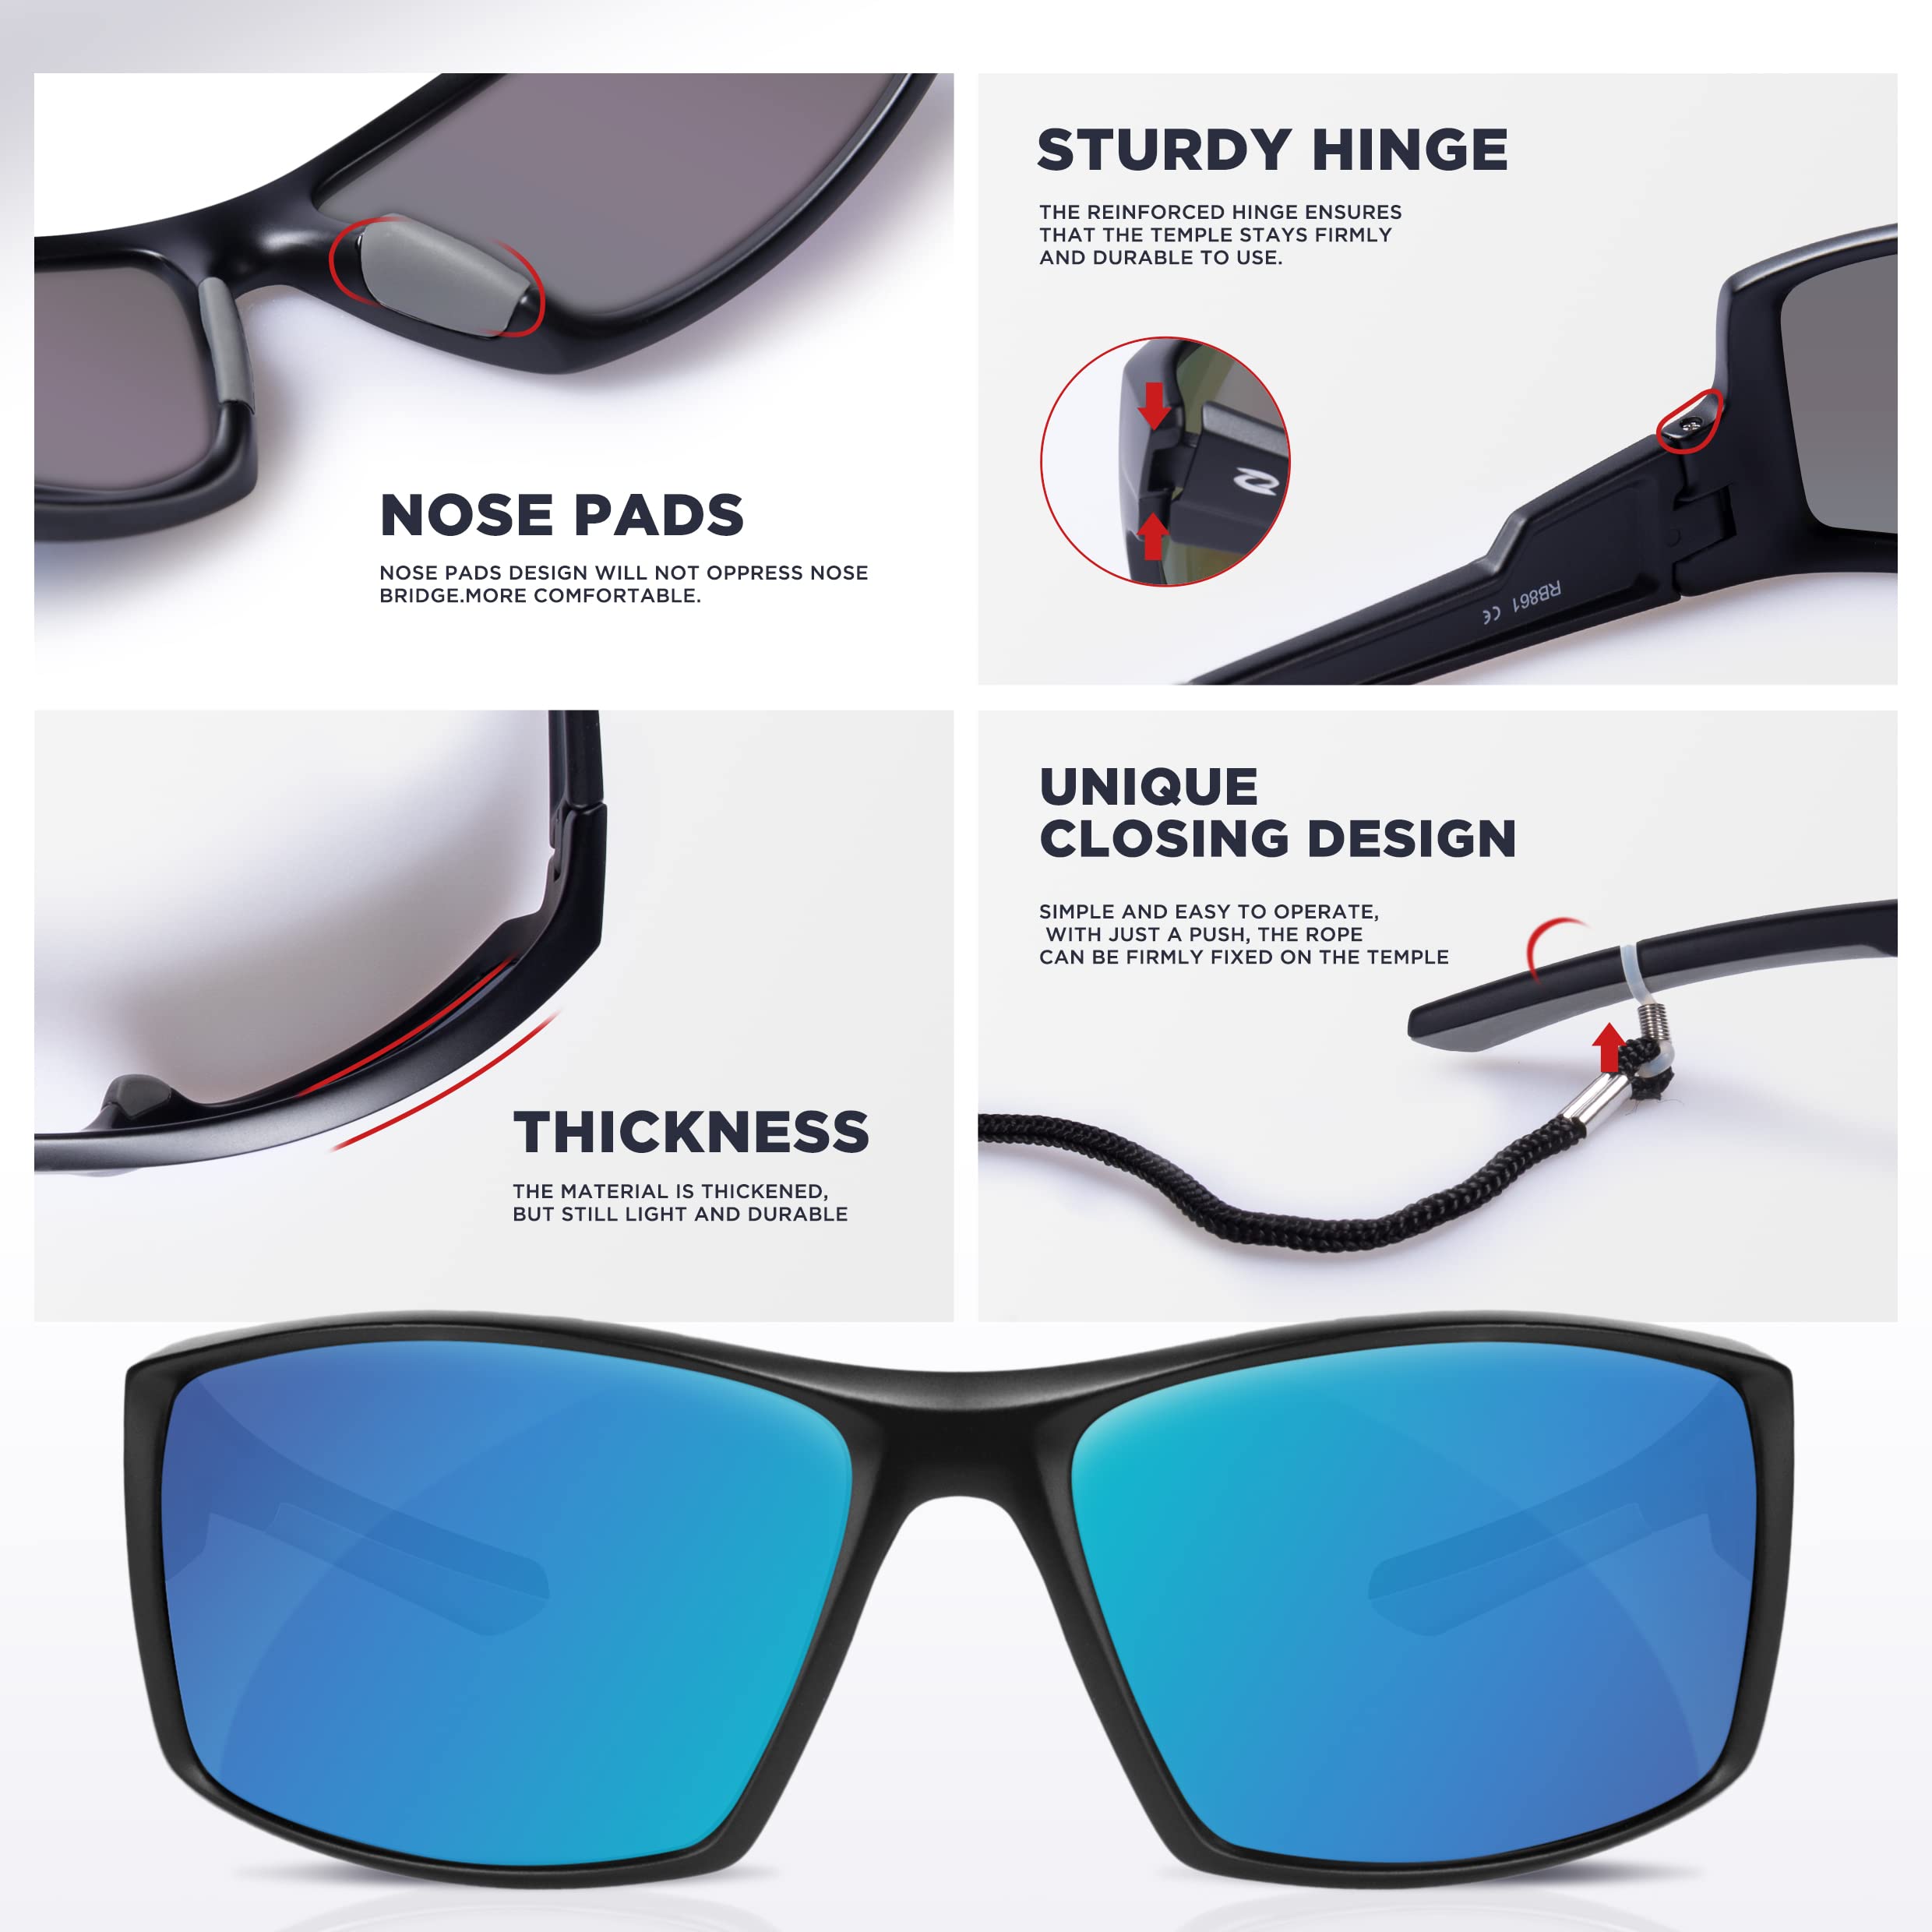 RIVBOS Polarized Sports Sunglasses Driving shades For Men TR90 Unbreakable Frame RBS861